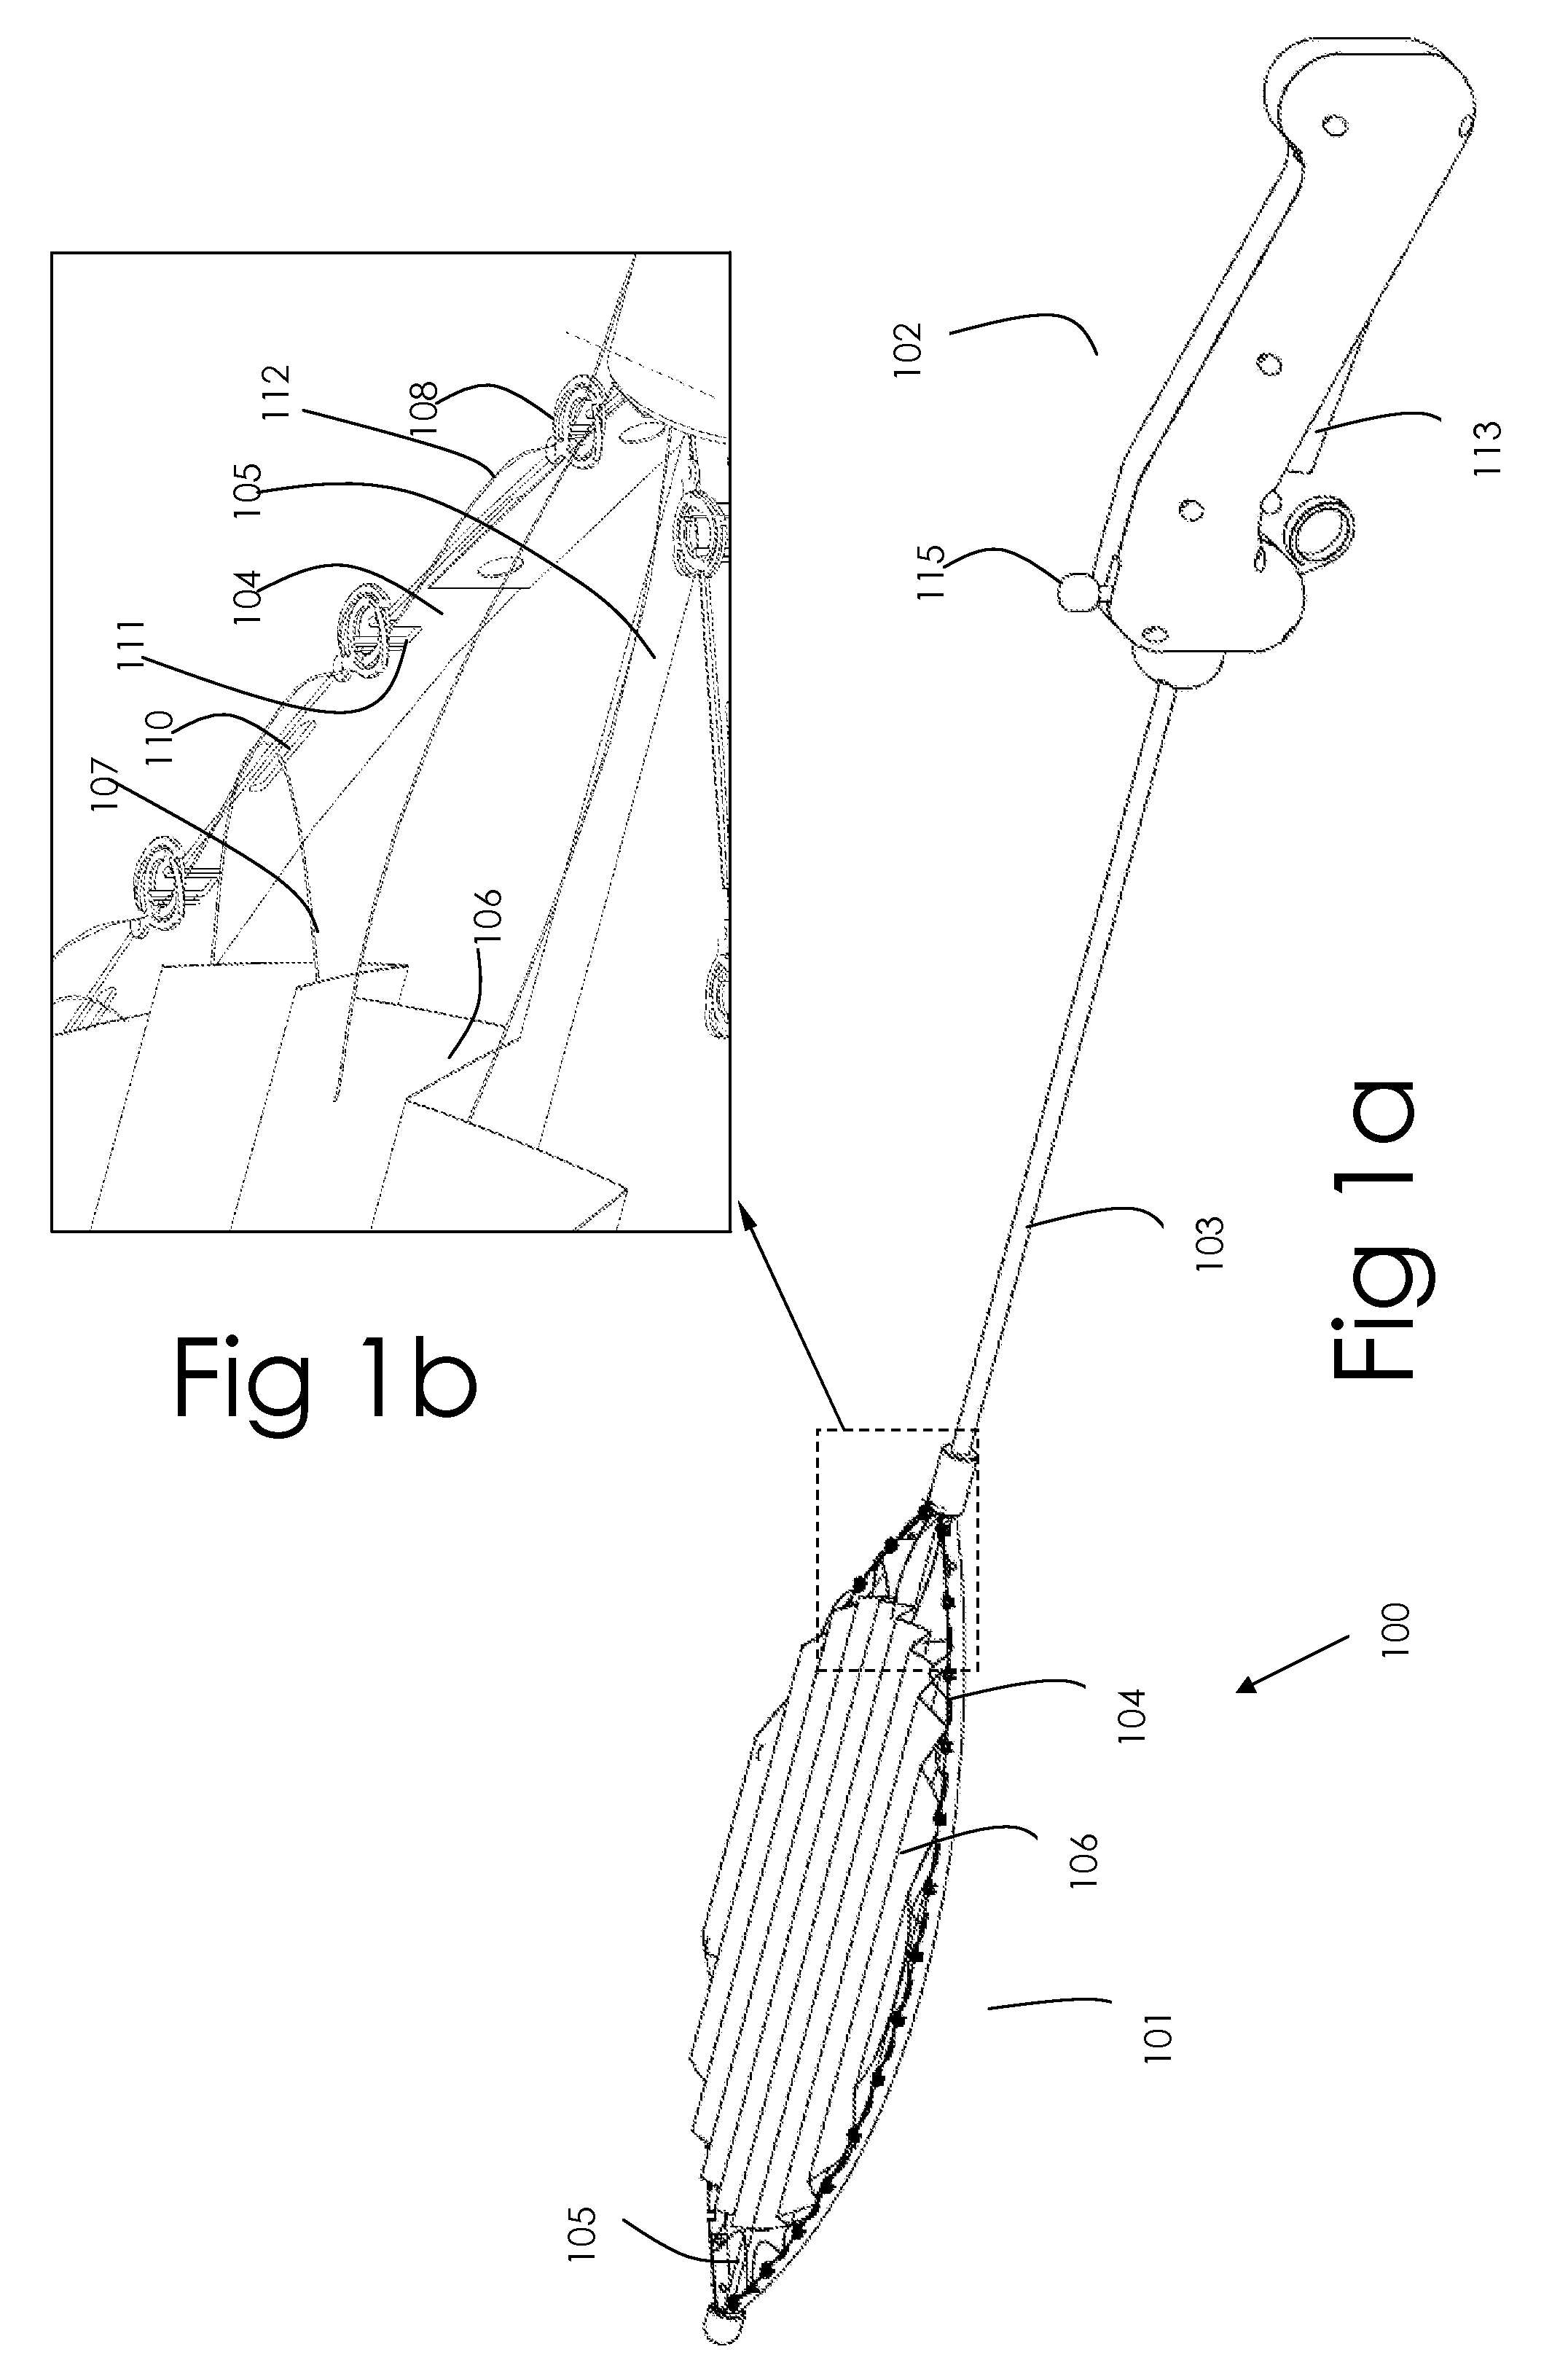 Device and method for deploying and attaching an implant to a biological tissue